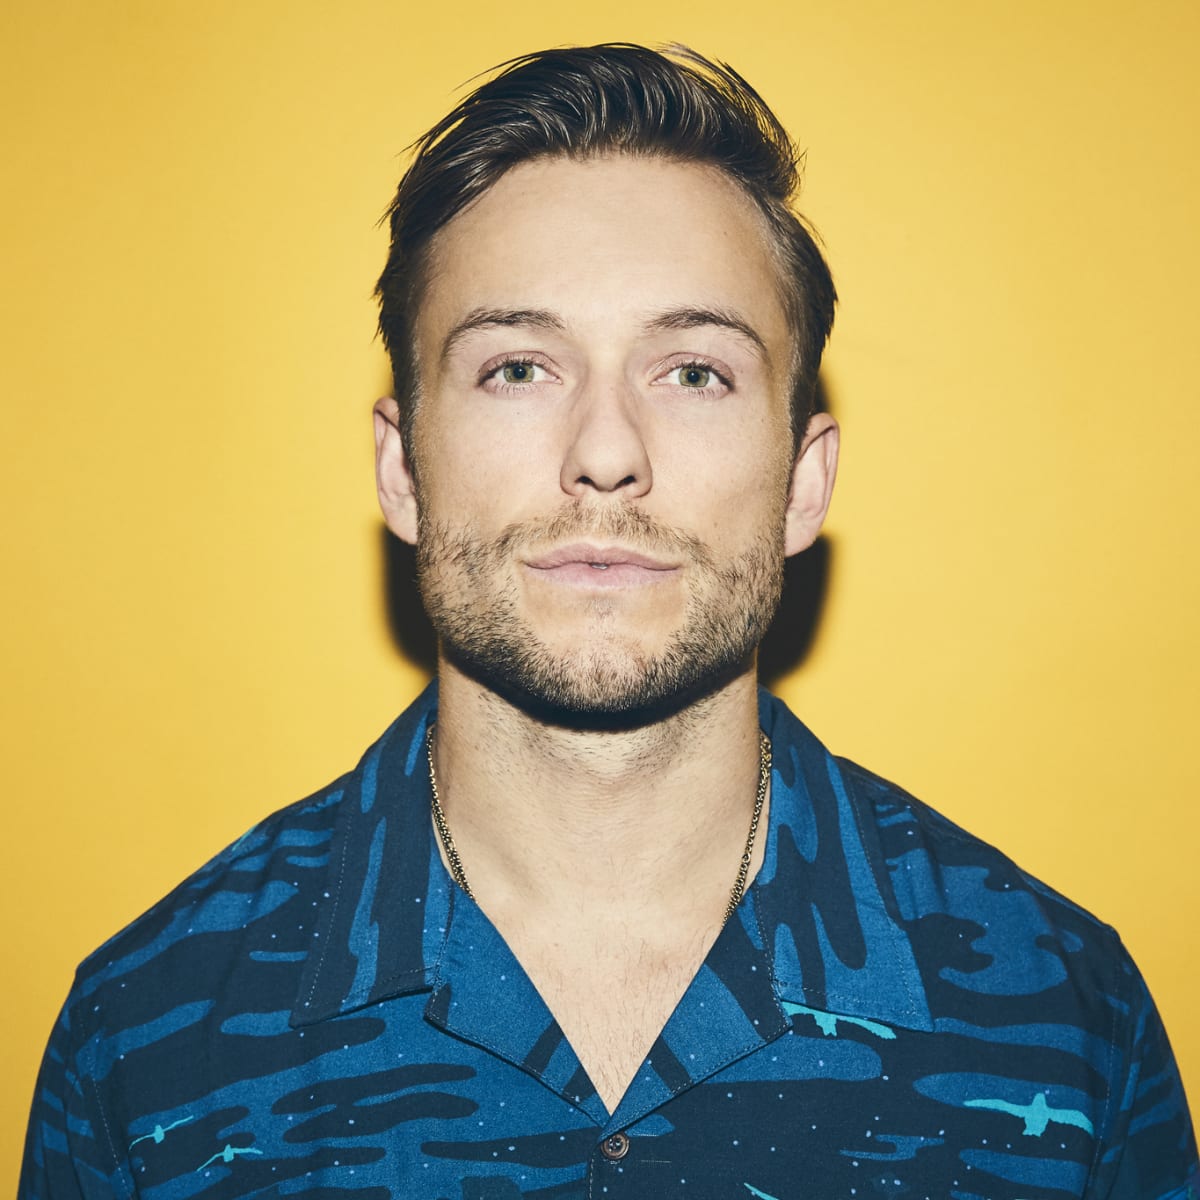 Party Favor Delivers Remix Package for Debut Album, Layers -  - The  Latest Electronic Dance Music News, Reviews & Artists